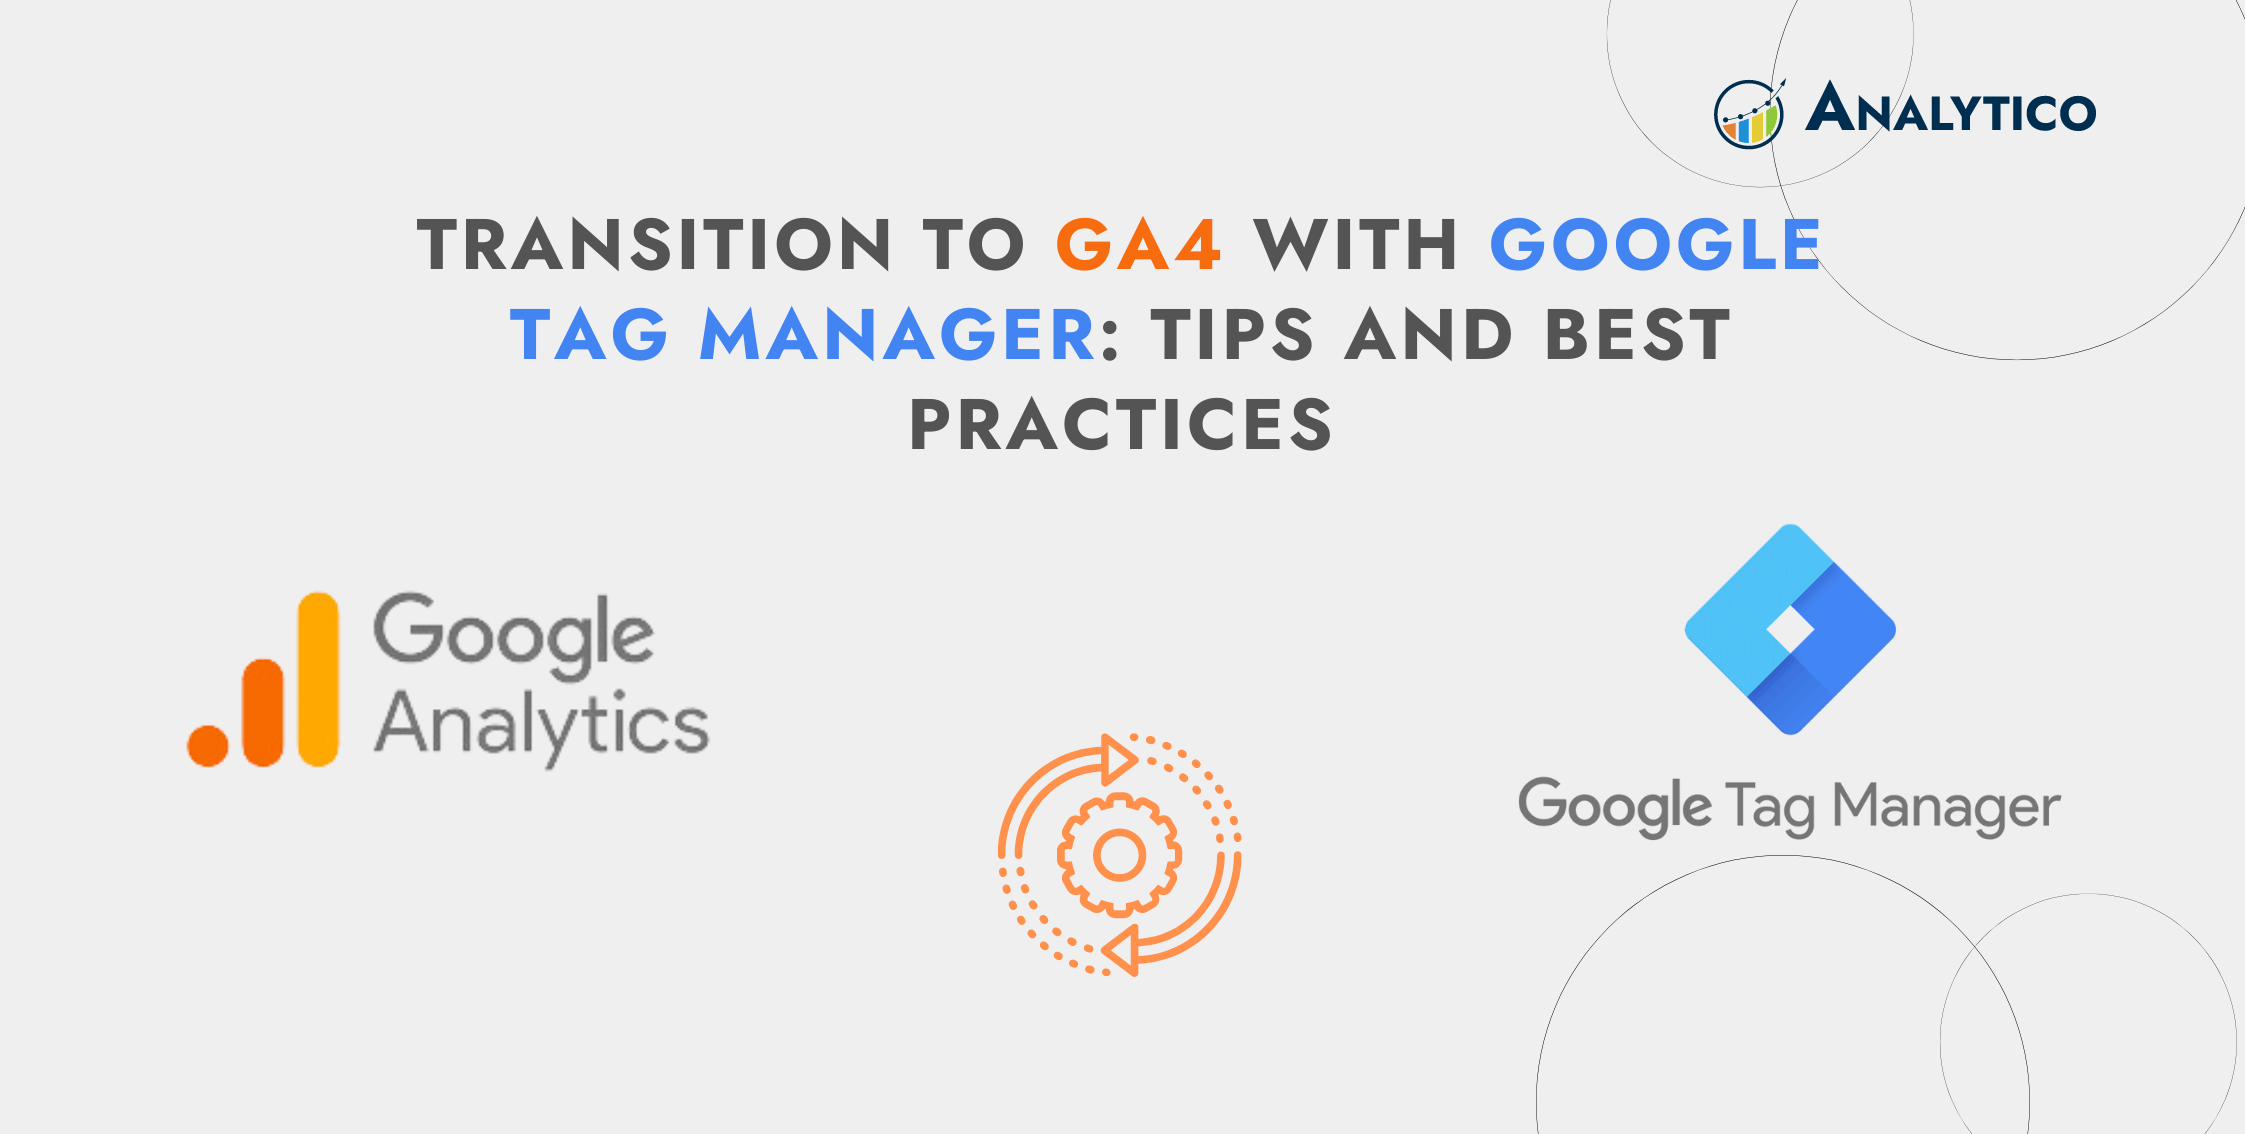 Transition to GA4 with Google Tag Manager: Tips and Best Practices